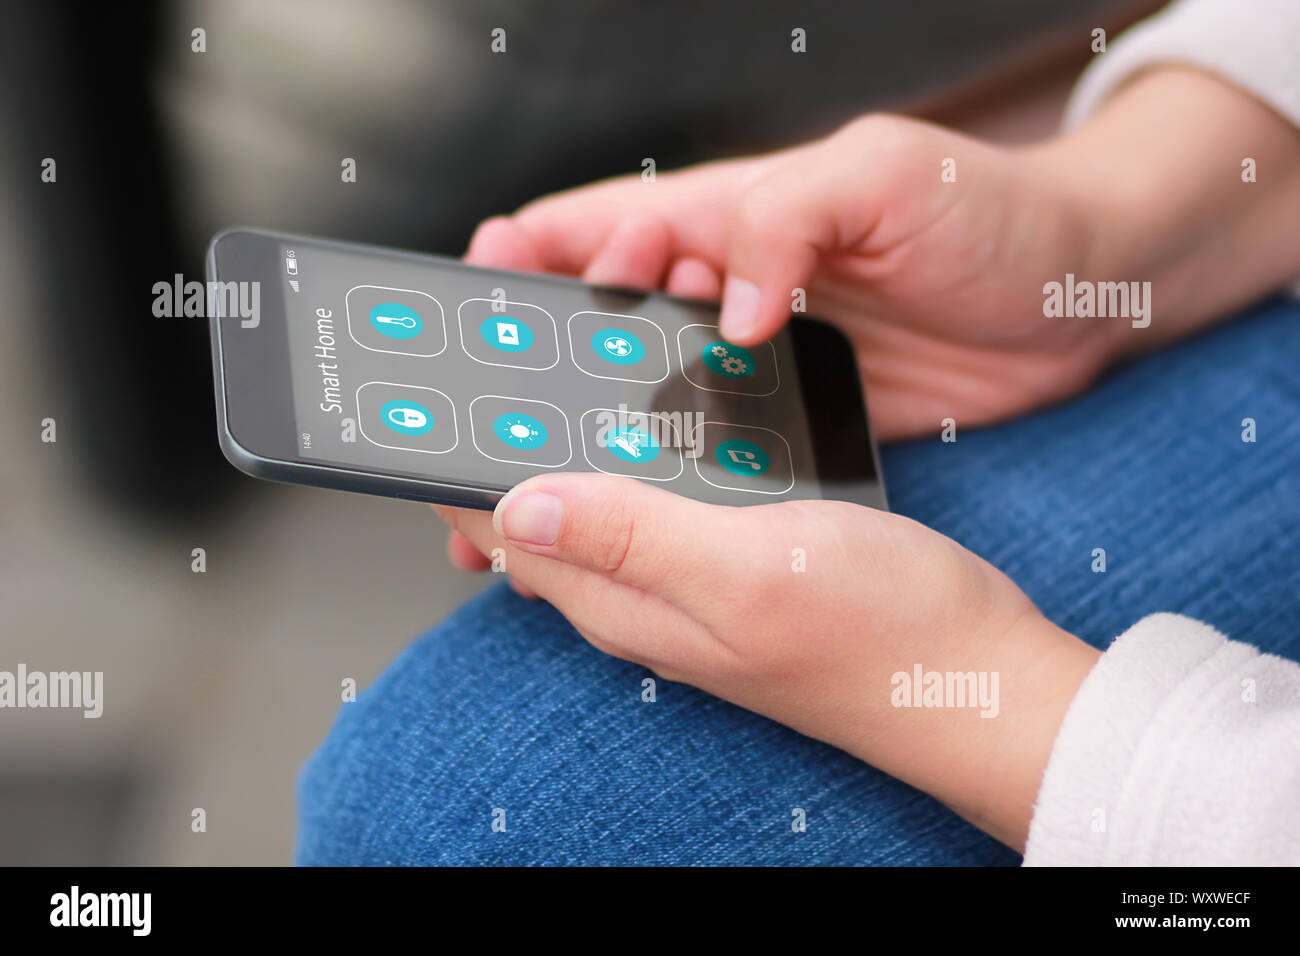 Closeup of woman's hands with black smartphone and Smart home application icons interface design. House automation concept. Stock Photo